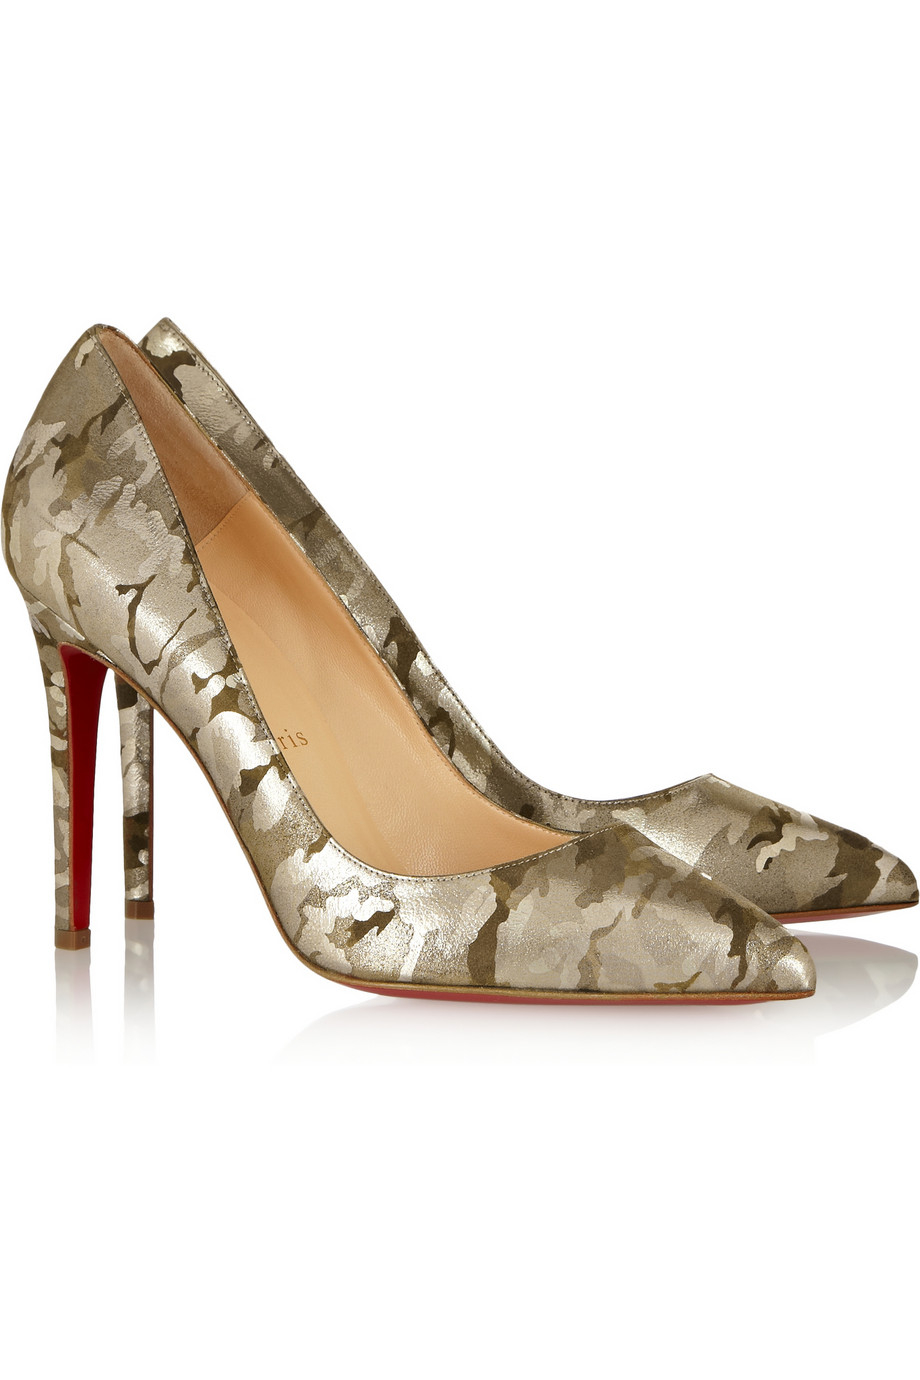 Christian louboutin Pigalle 100 Camouflage-Print Metallic Suede ...